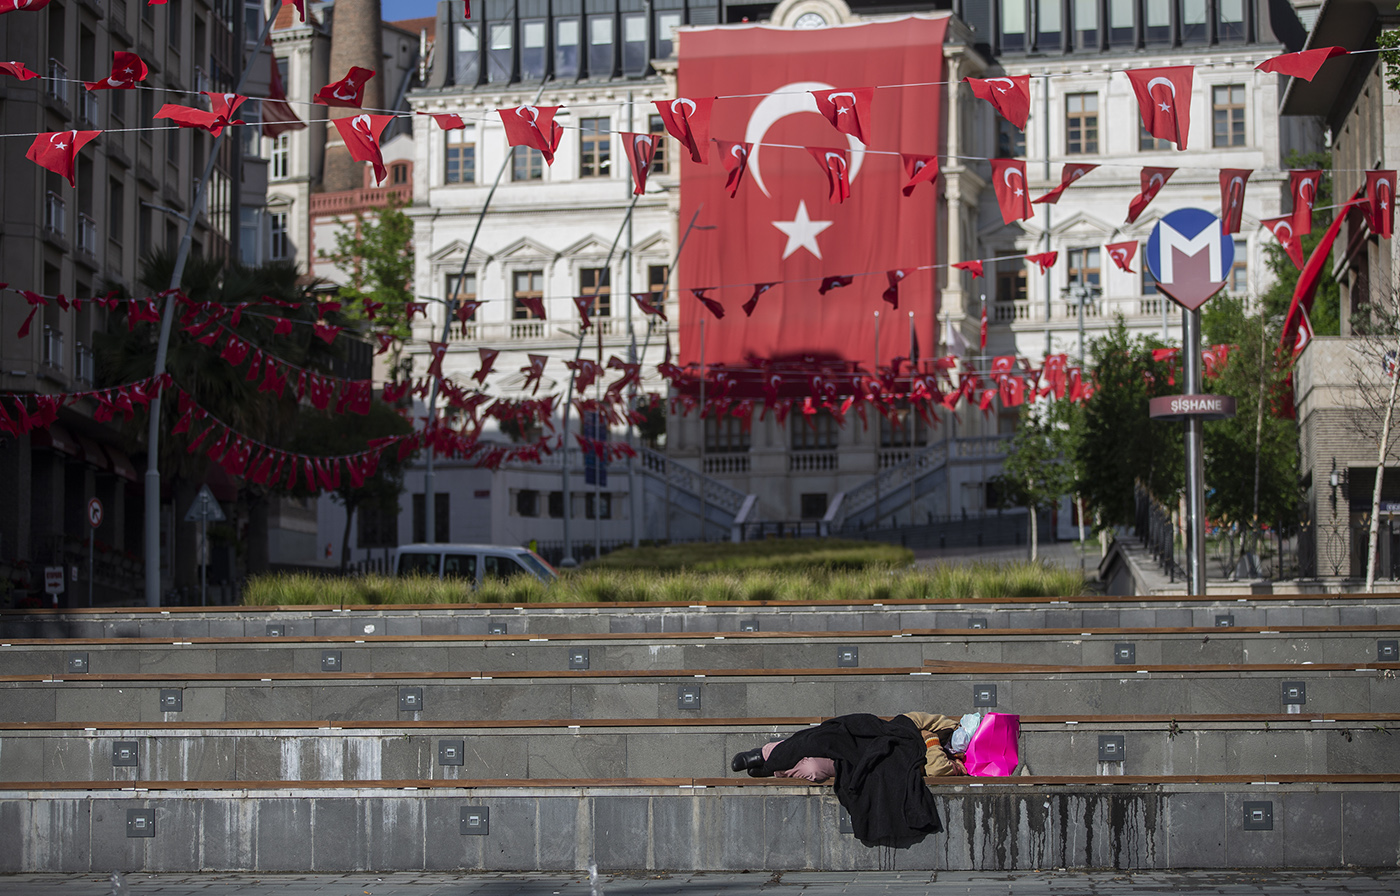  A homeless woman sleeps in front of the huge Turkish flag during a curfew amid the ongoing pandemic of the COVID-19 disease caused by the SARS-CoV-2 coronavirus in Istanbul, Turkey, 23 May 2020. 